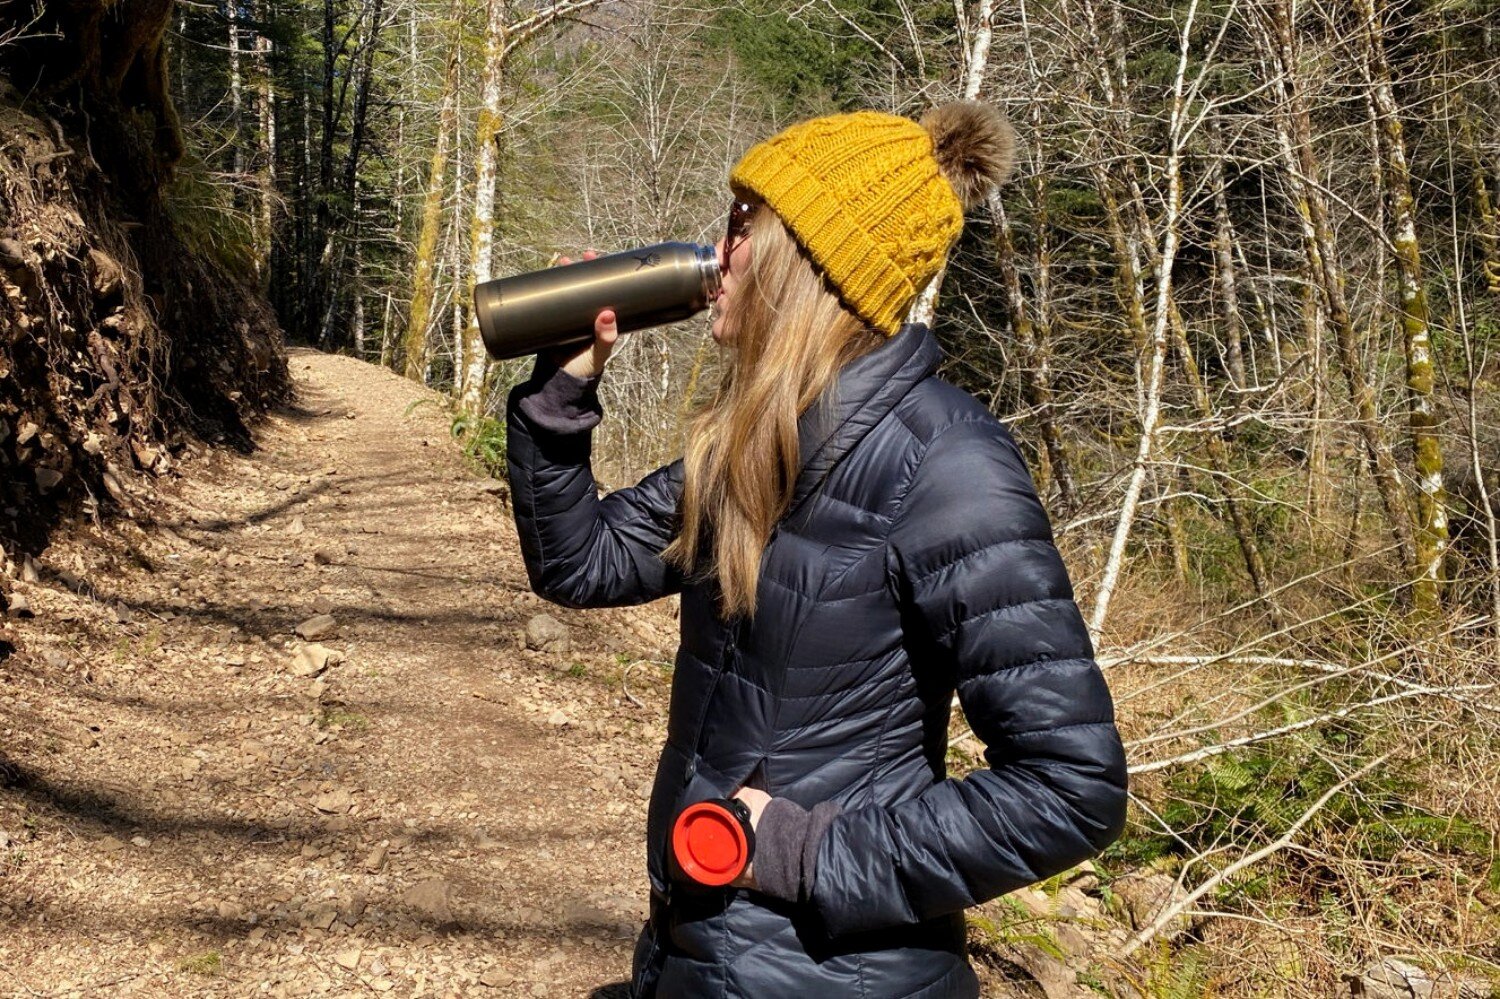 https://www.cleverhiker.com/wp-content/uploads/2020/05/Drinking-from-the-Hydro-Flask-Lightweight-Trail-Series-Wide-Mouth-Vacuum-Insulated-Water-Bottles-on-a-dayhike-in-cold-weather.jpeg